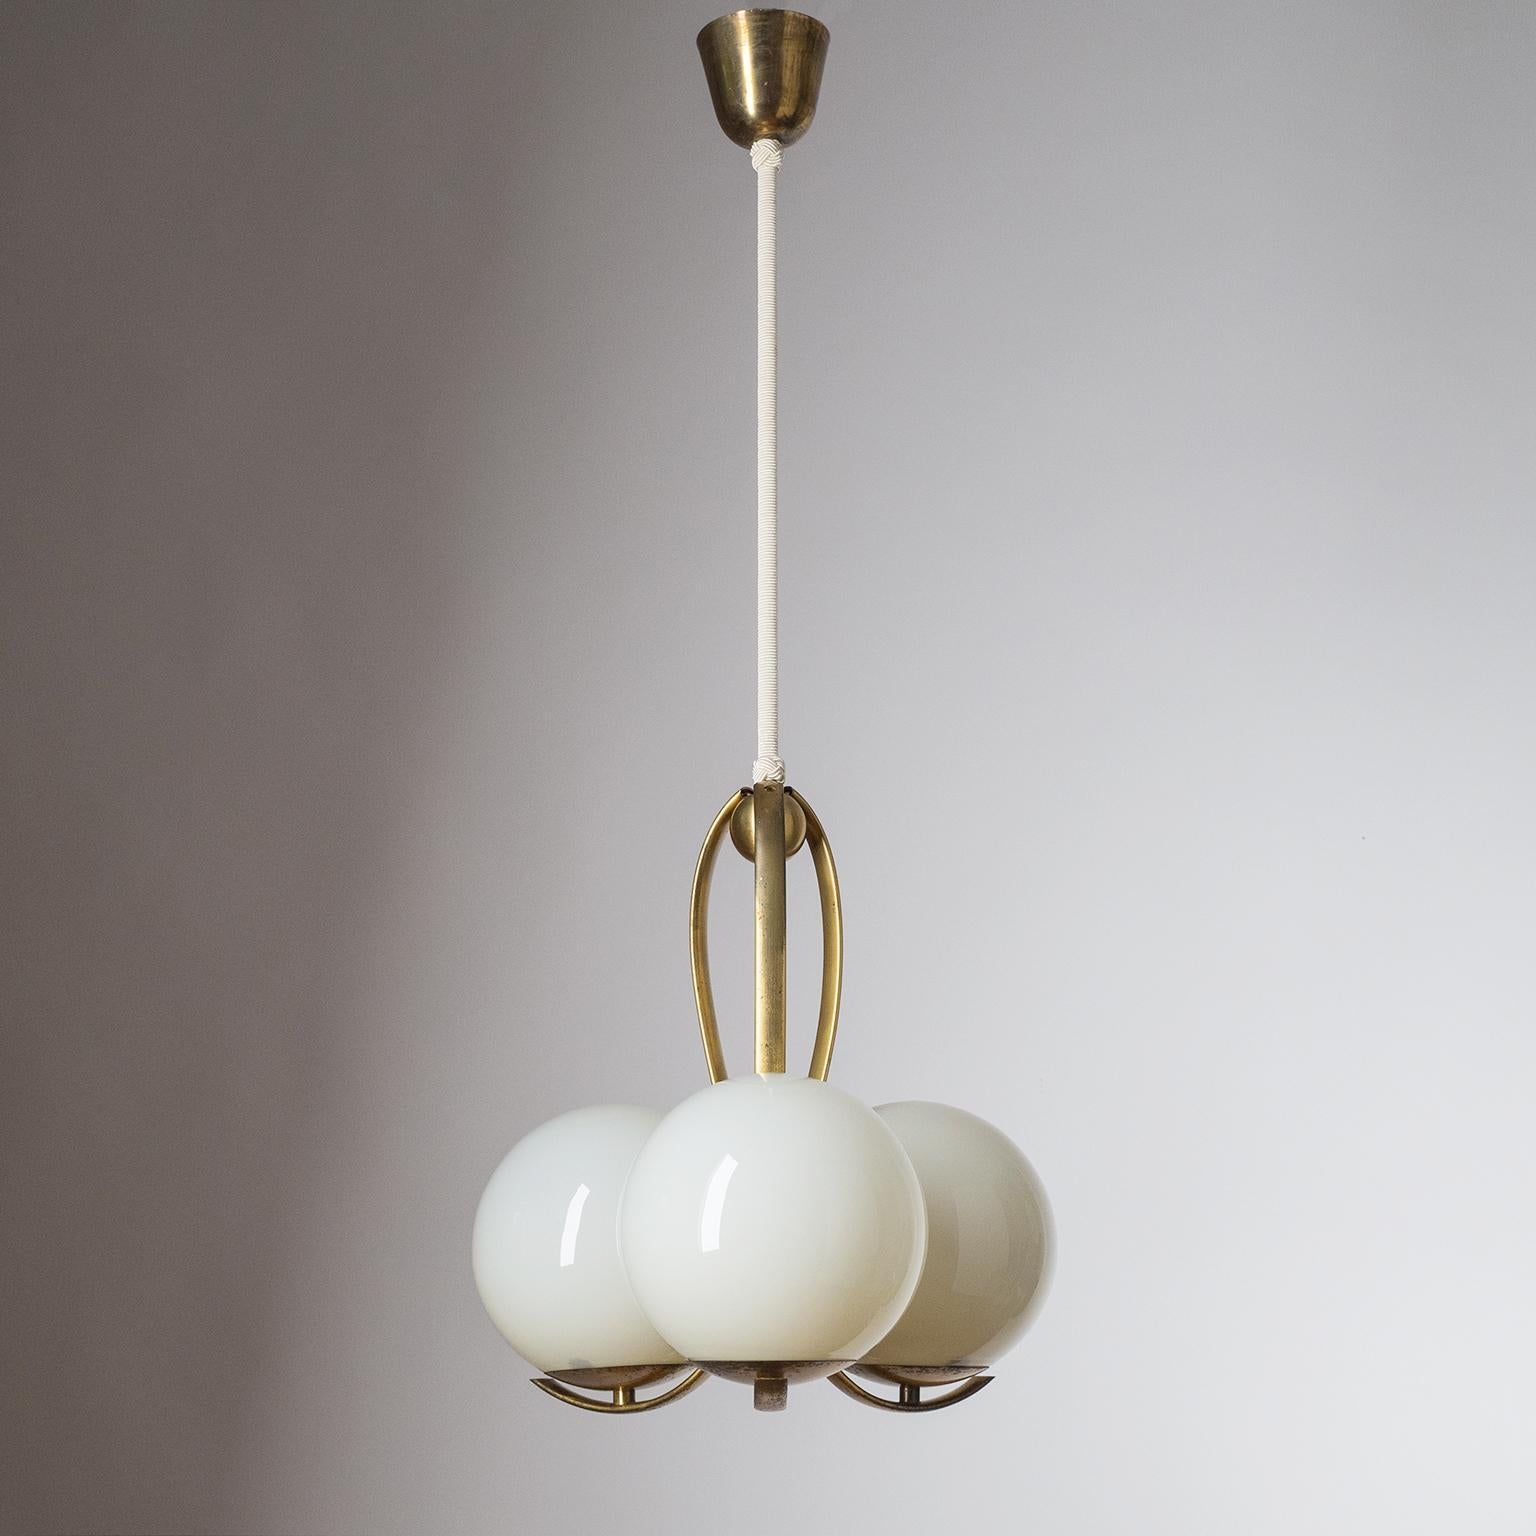 Rare three-globe Art Deco chandelier, circa 1930. Blown ivory-colored glass diffusers on curved brass hardware. Original bakelite E27 sockets with new wiring.